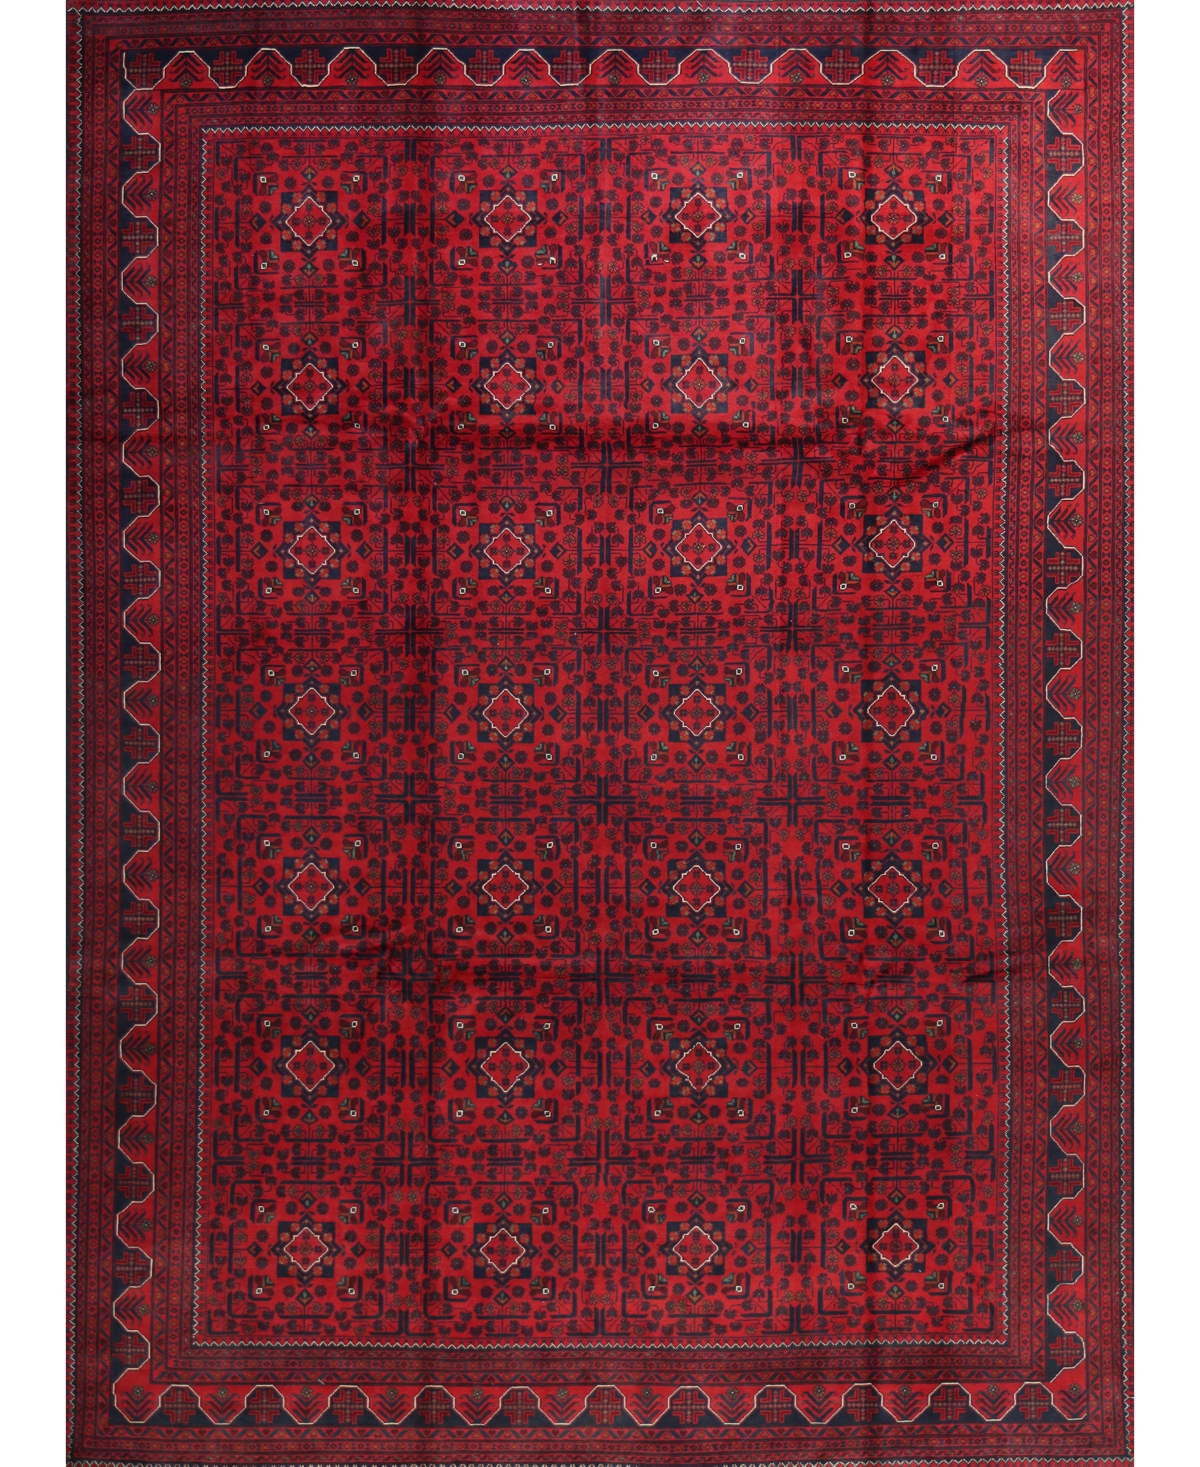 Bb Rugs One Of A Kind Fine Beshir 8'1" X 11' Area Rug In Red